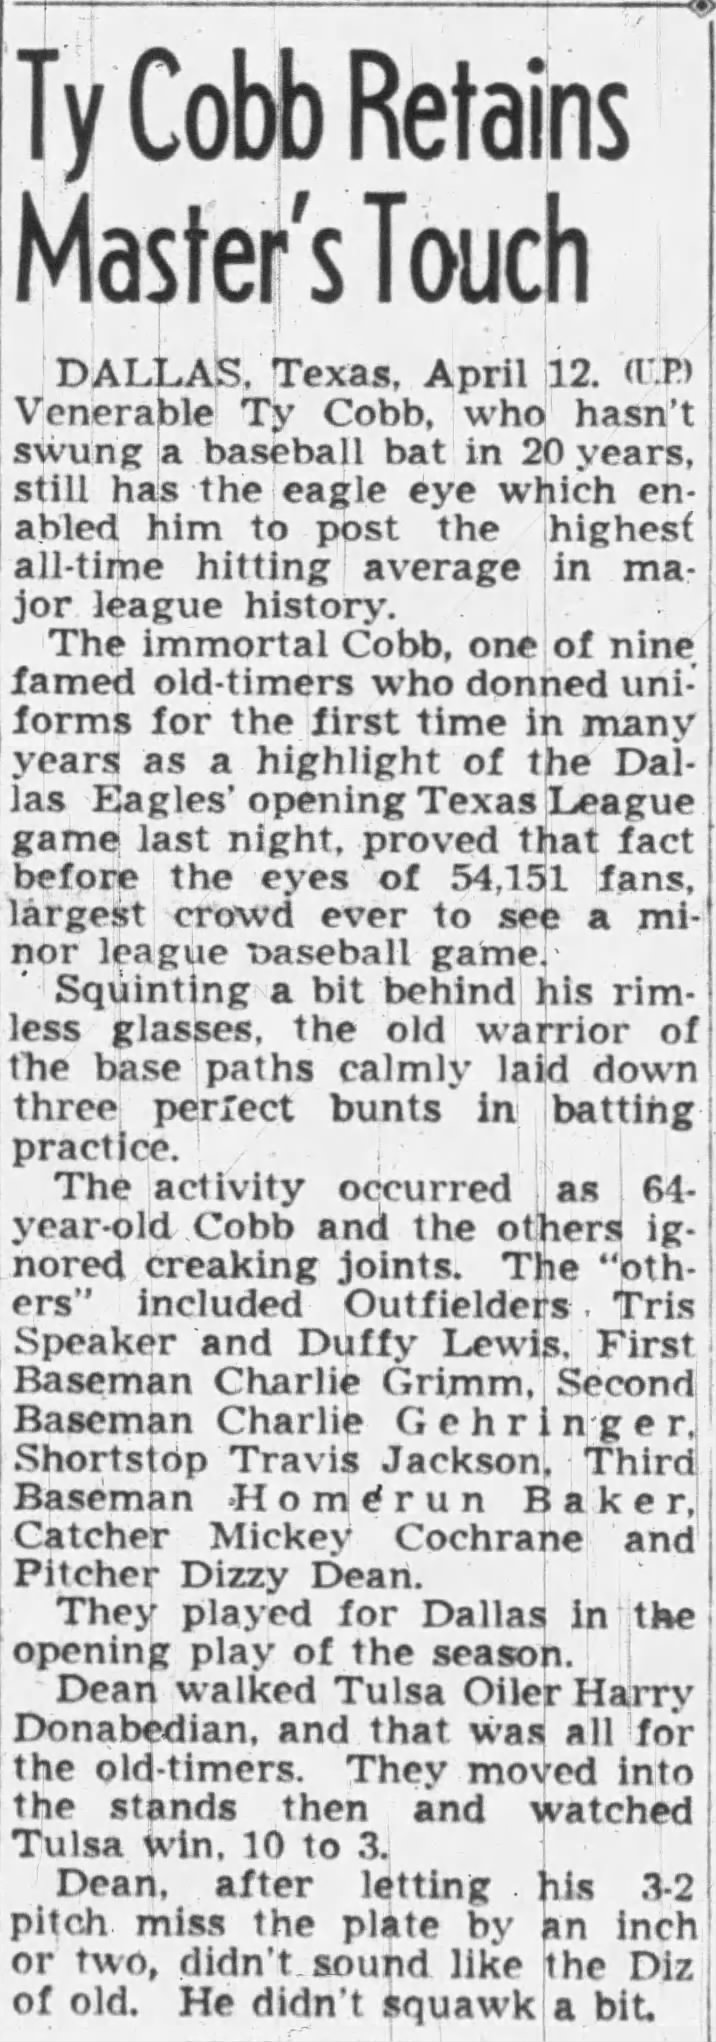 Ty Cobb Retains Master's Touch